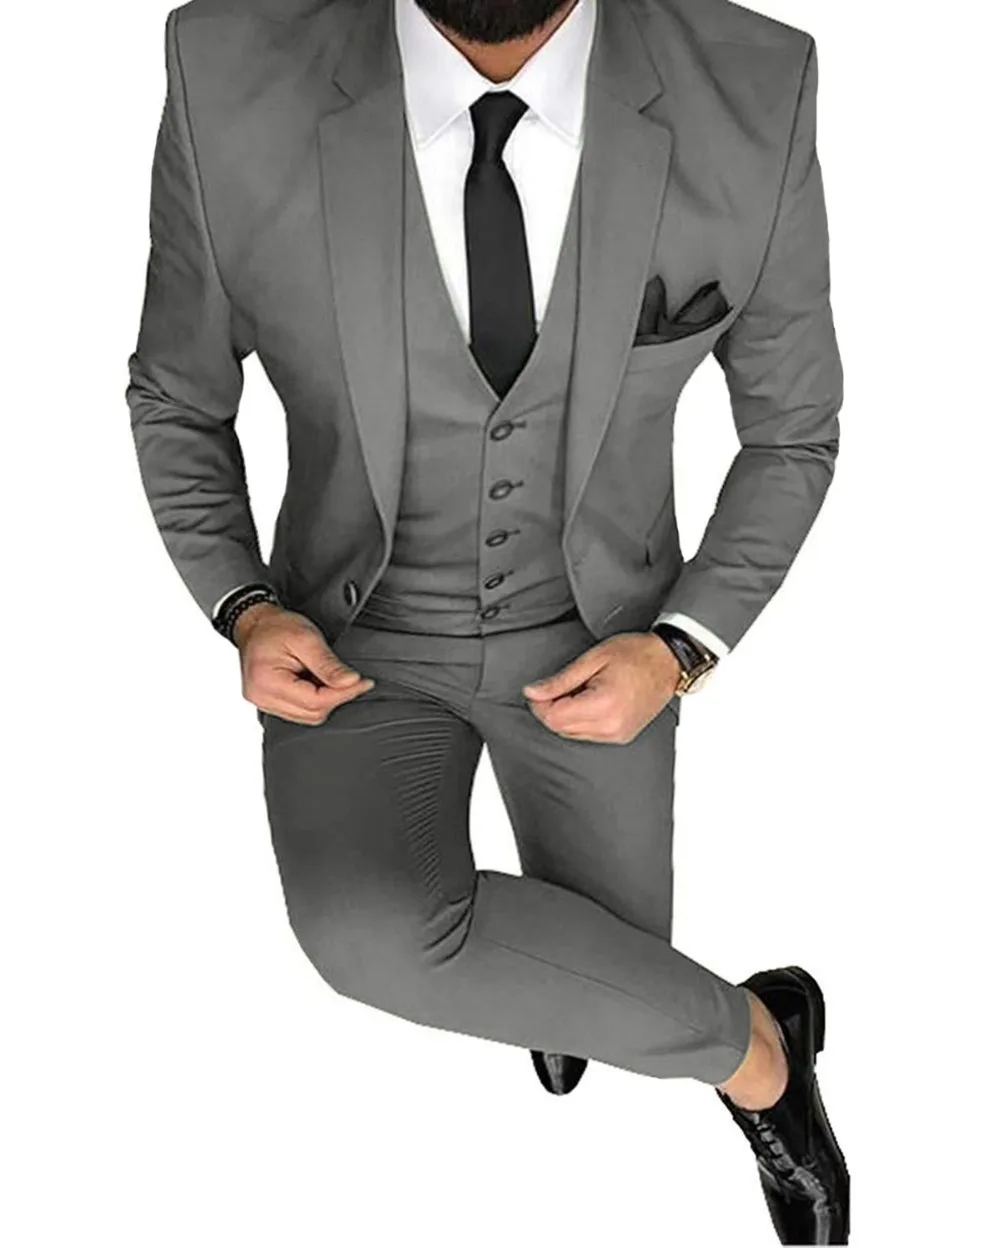 Men Suits Slim Fit Casual 3 Pieces Business Groomsmen Grey Green champagne Lapel Tuxedos for Formal Wedding(Blazer+Pants+Vest)